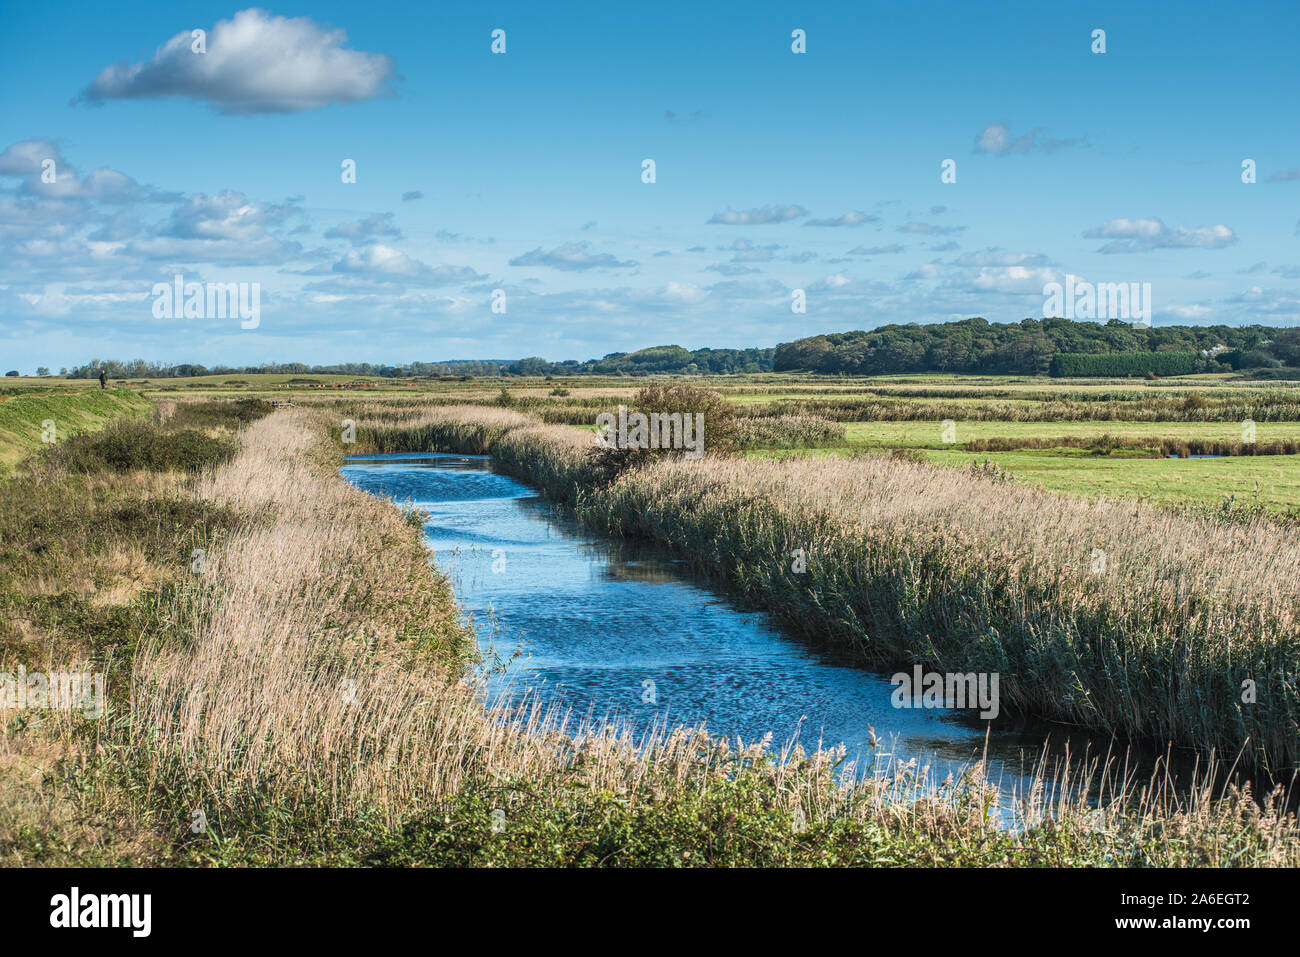 Views of waterway surrounded by reeds, from Norfolk Coast path National Trail near Burnham Overy Staithe, East Anglia, England, UK. Stock Photo